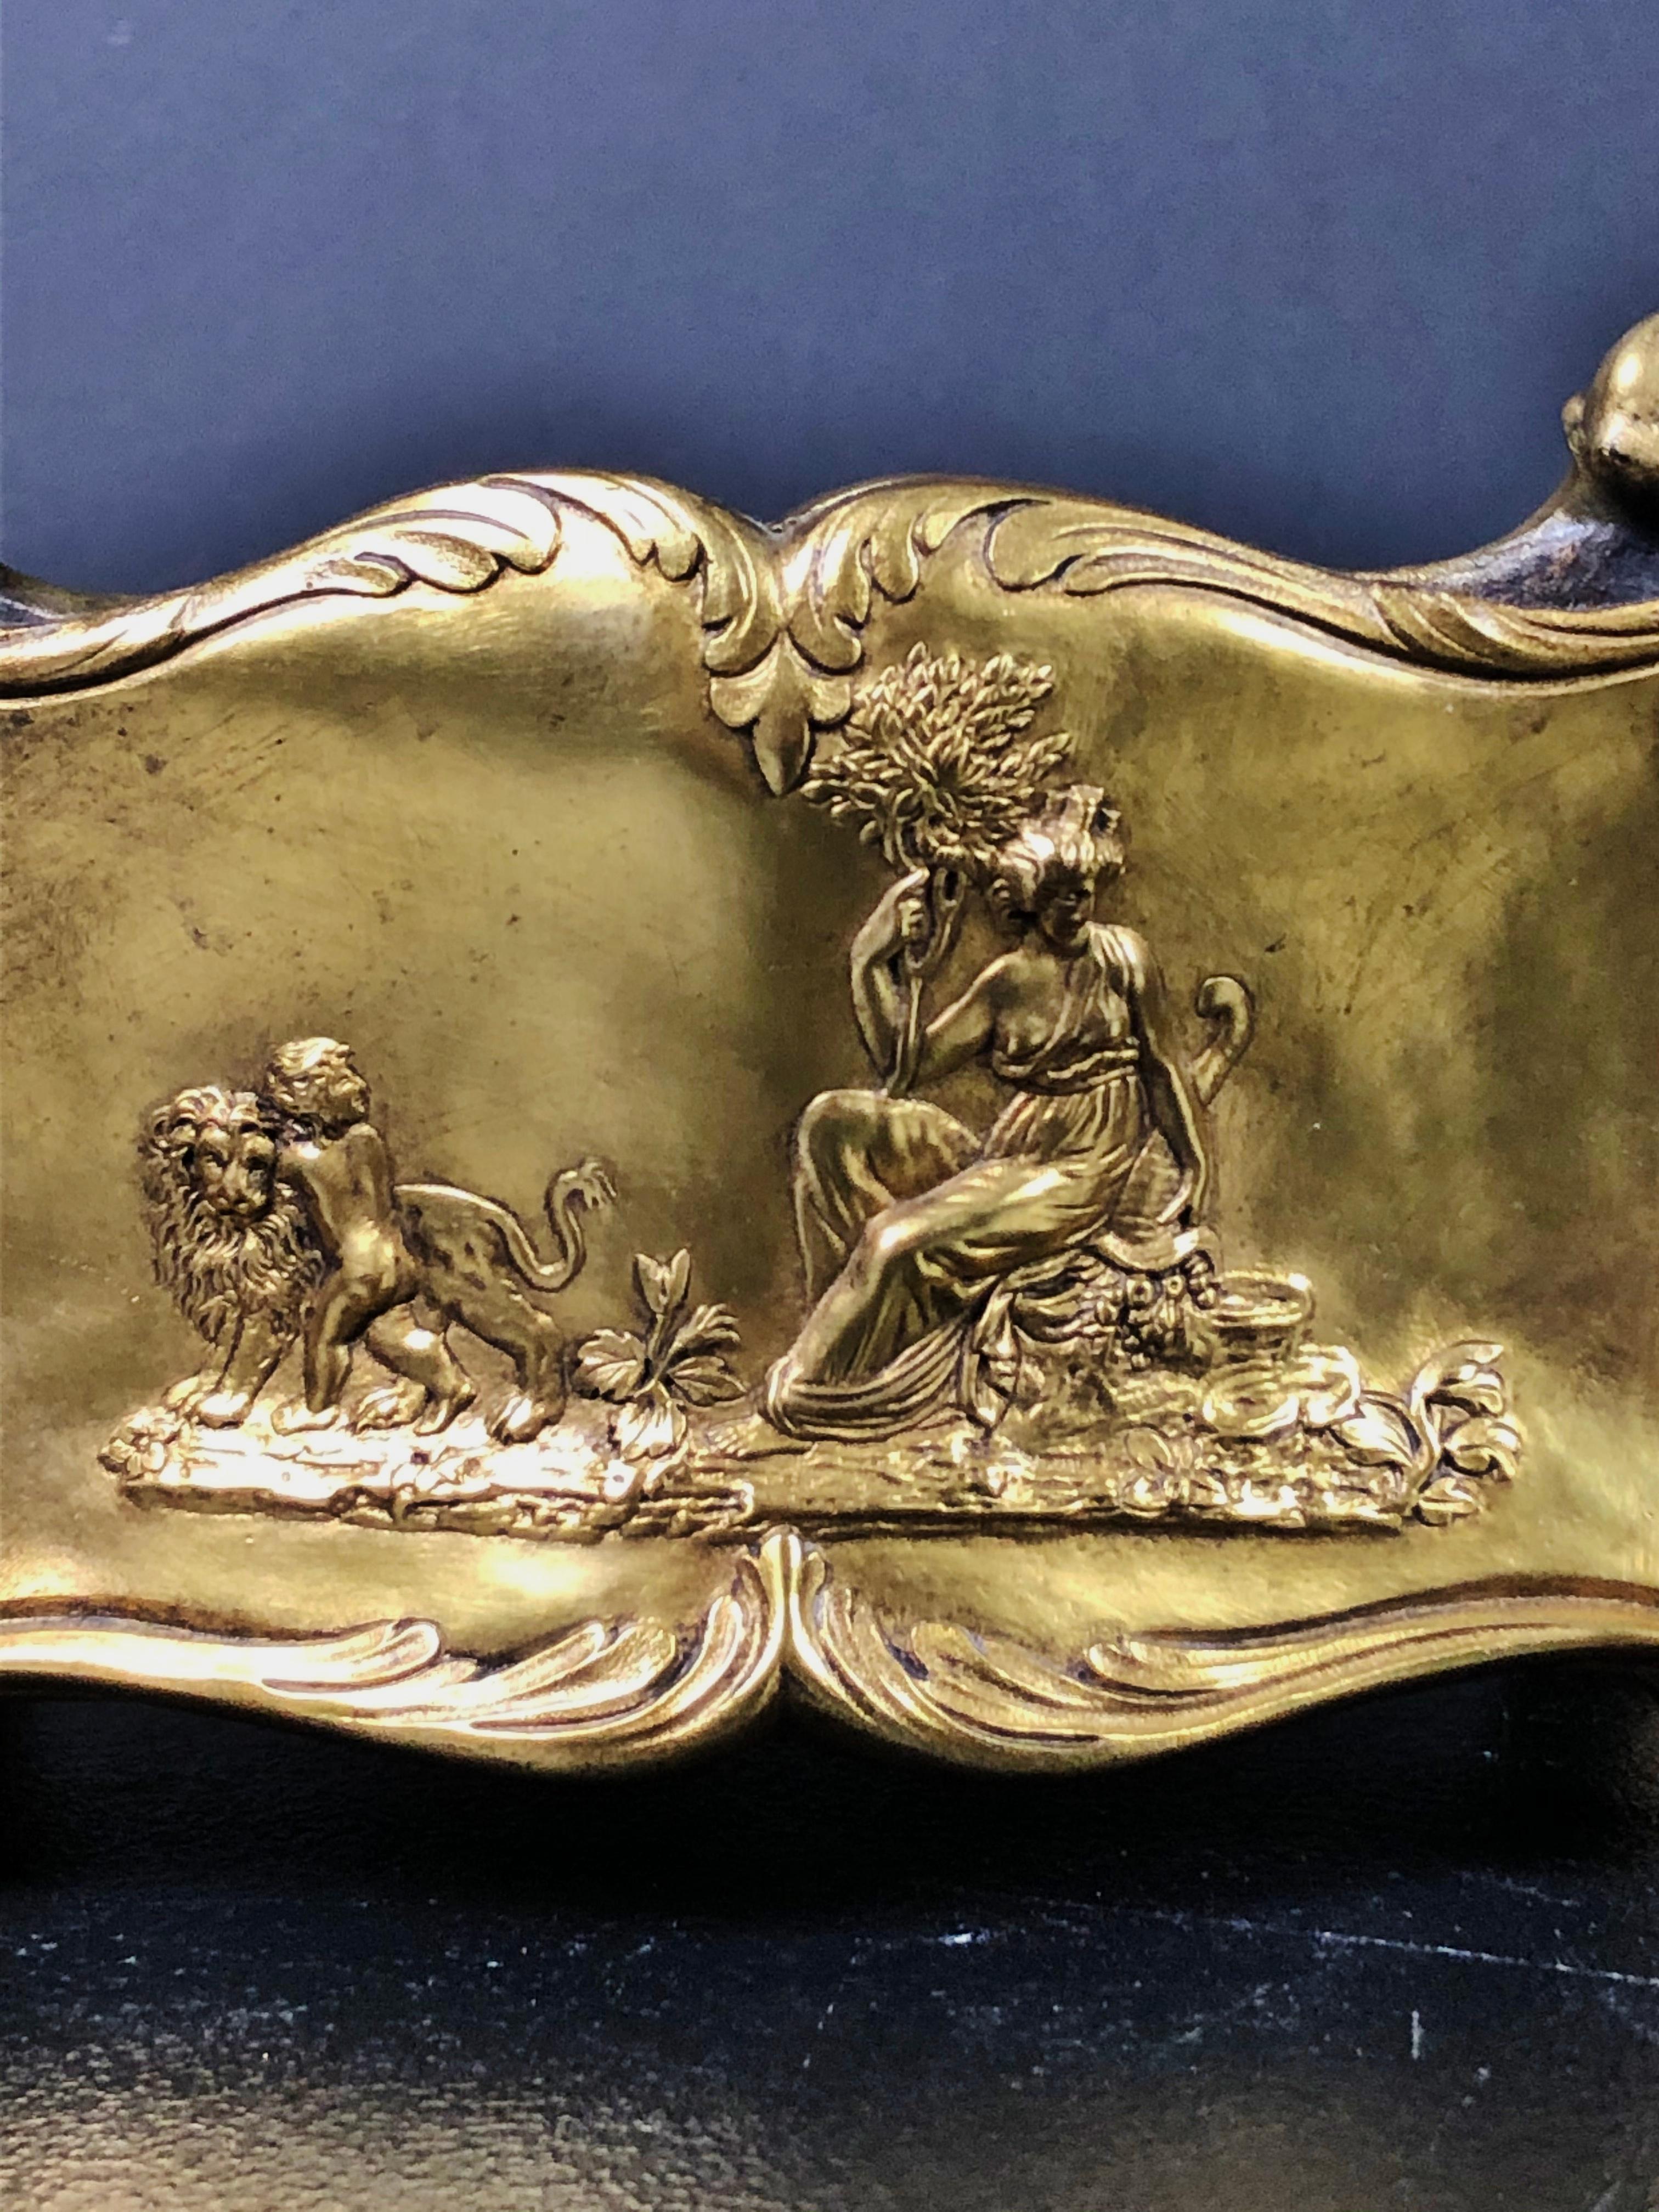 French 19th century gilt bronze cachepot planter. Louis XV style with figural panels with women and putti. Lion and eagle. Venus in shell being pulled by Dolphin.